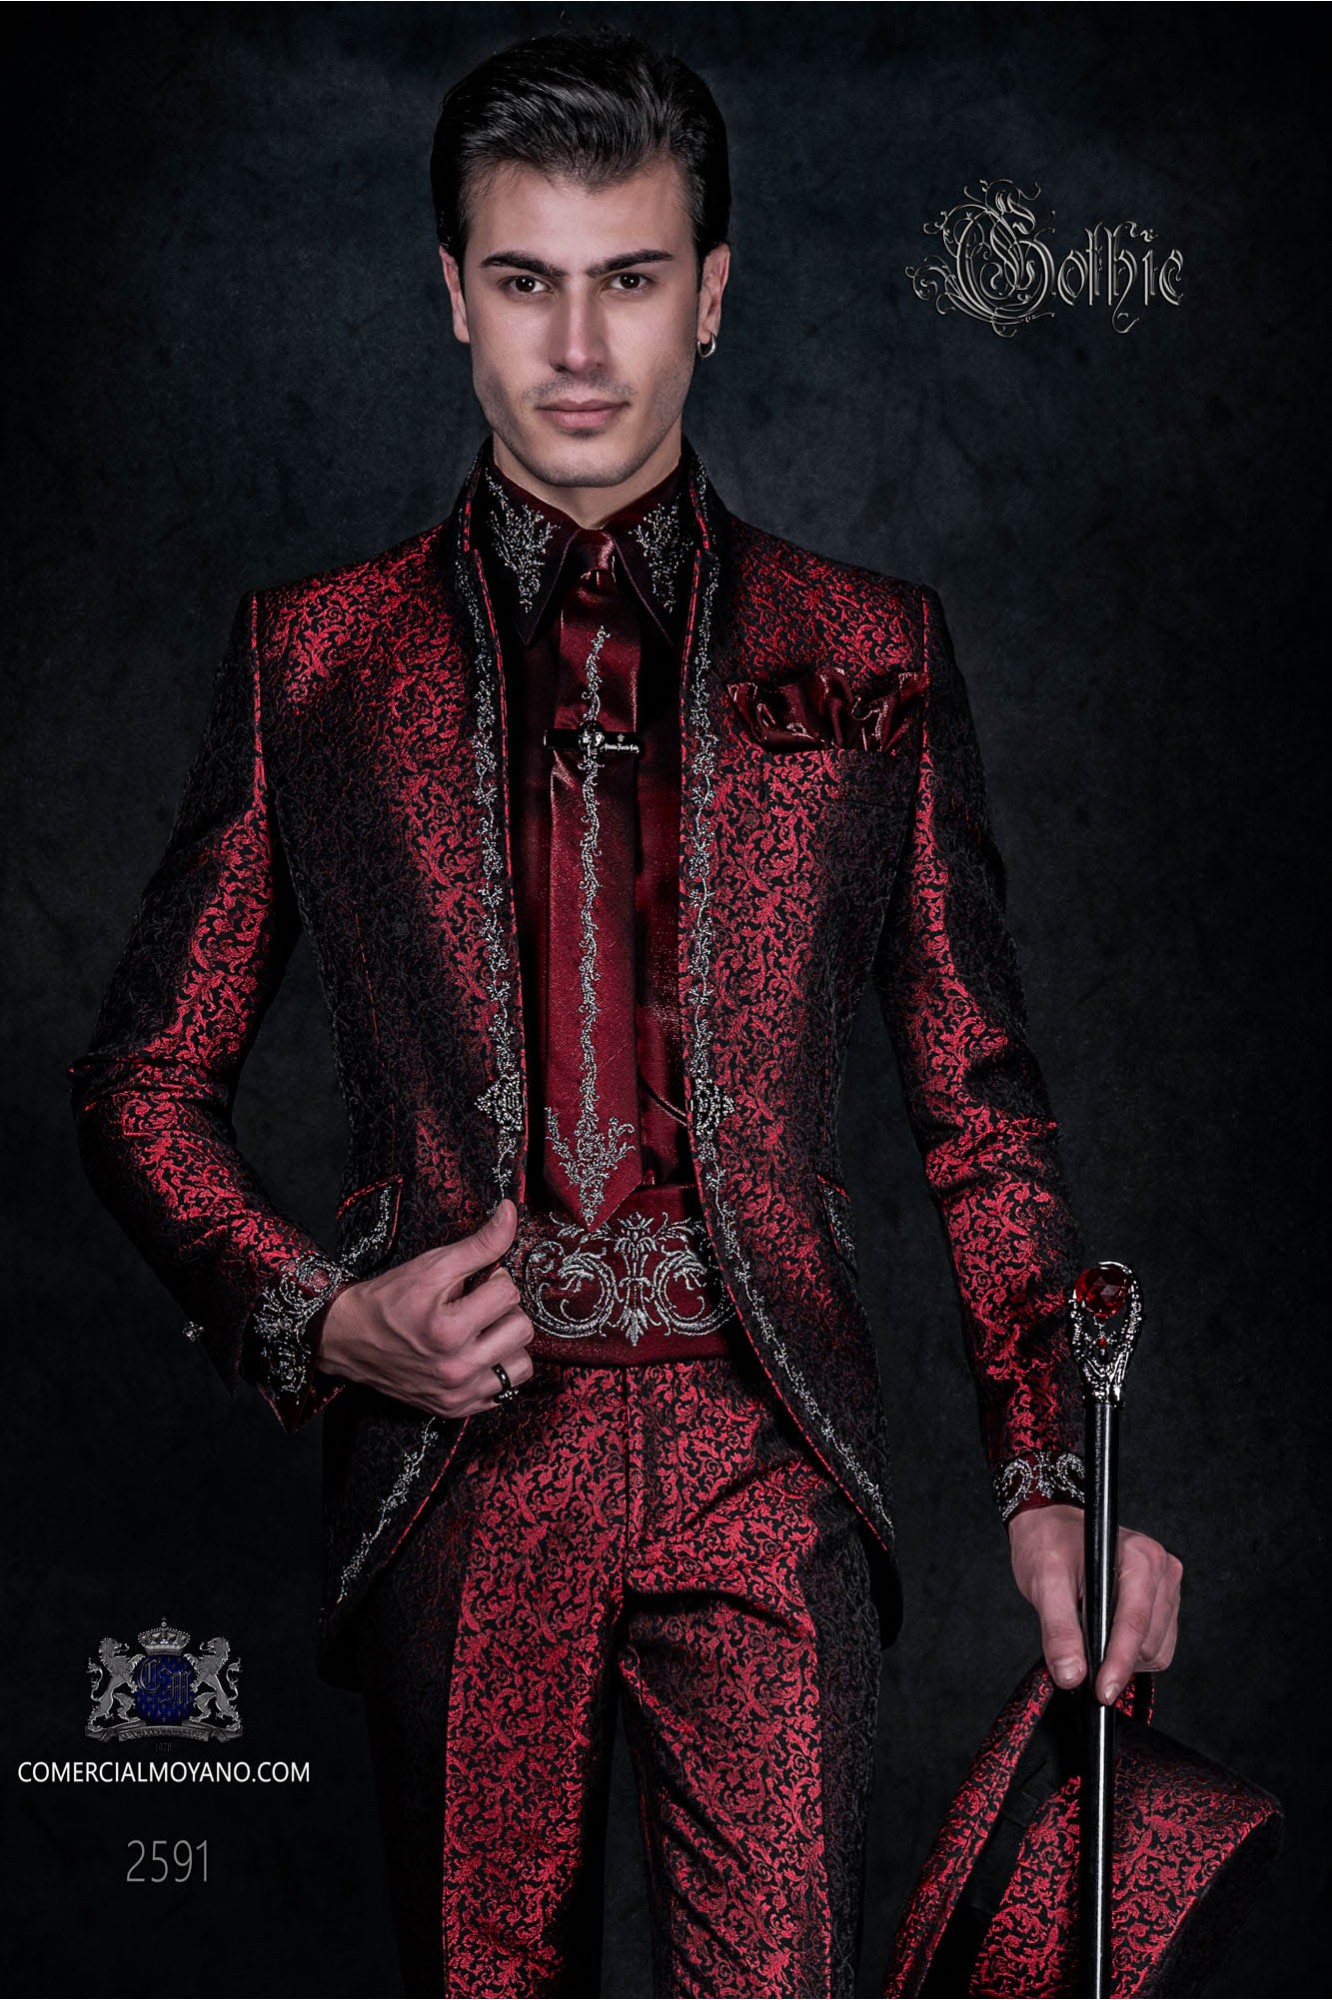 Baroque groom suit, vintage mao collar frock coat in red jacquard fabric with silver embroidery and crystal clasp model 2591 Mario Moyano